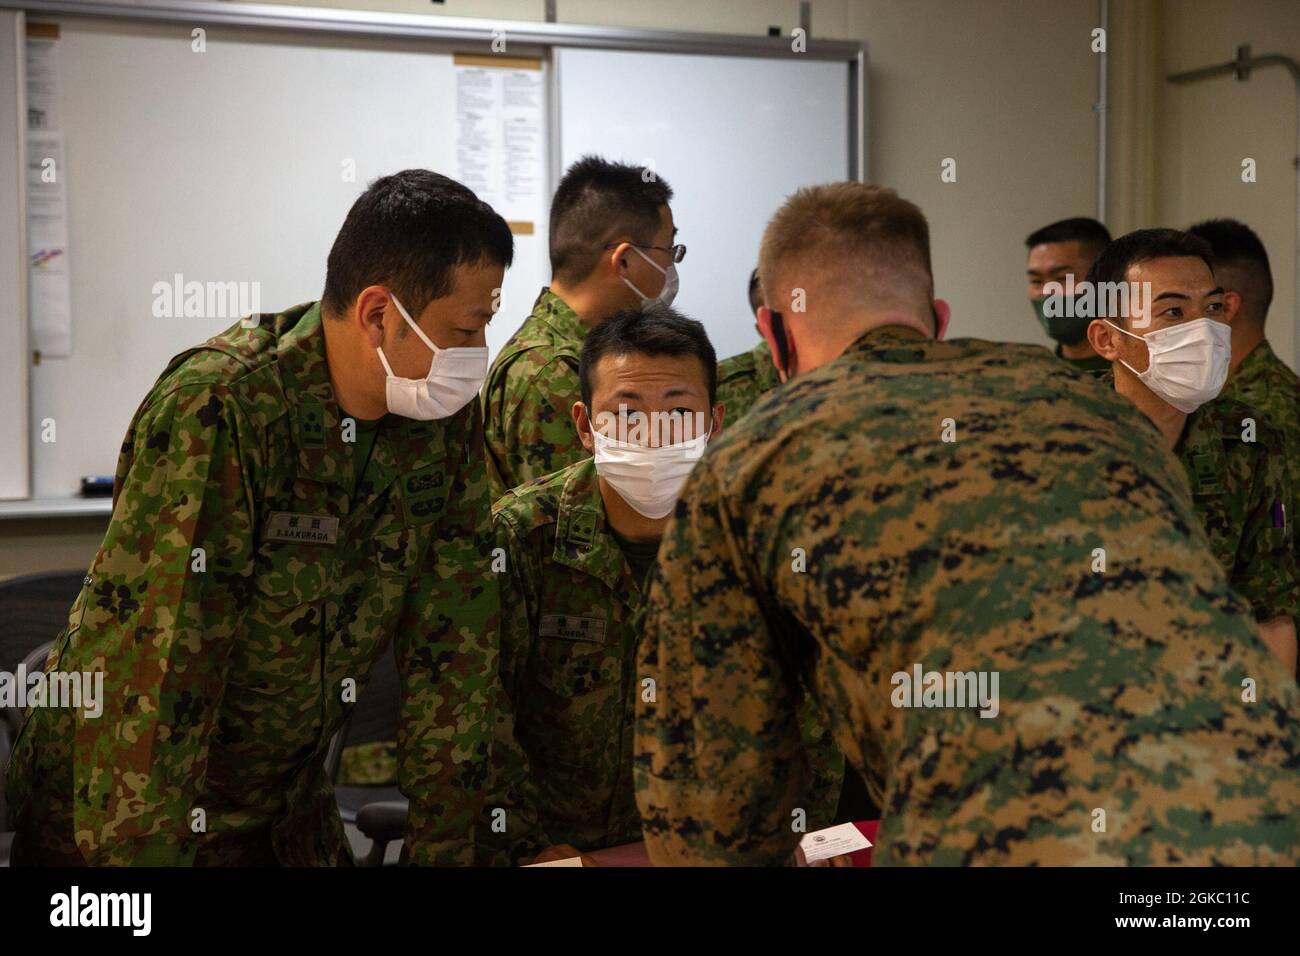 Capt. Shinsaku Sakurada (left), and 1st Lt. Shuhei Ueda (middle), both intelligence officers with 51st Japan Ground Self-Defense Force Regiment, meet with 2nd Lt. Coby Fisher, an intelligence officer with 4th Marine Regiment, during a key leader engagement at Camp Schwab, Okinawa, Japan on March 8, 2021. The discussions were aimed at enhancing interoperability and understanding between 4th Marines and the 51st Regiment. Stock Photo